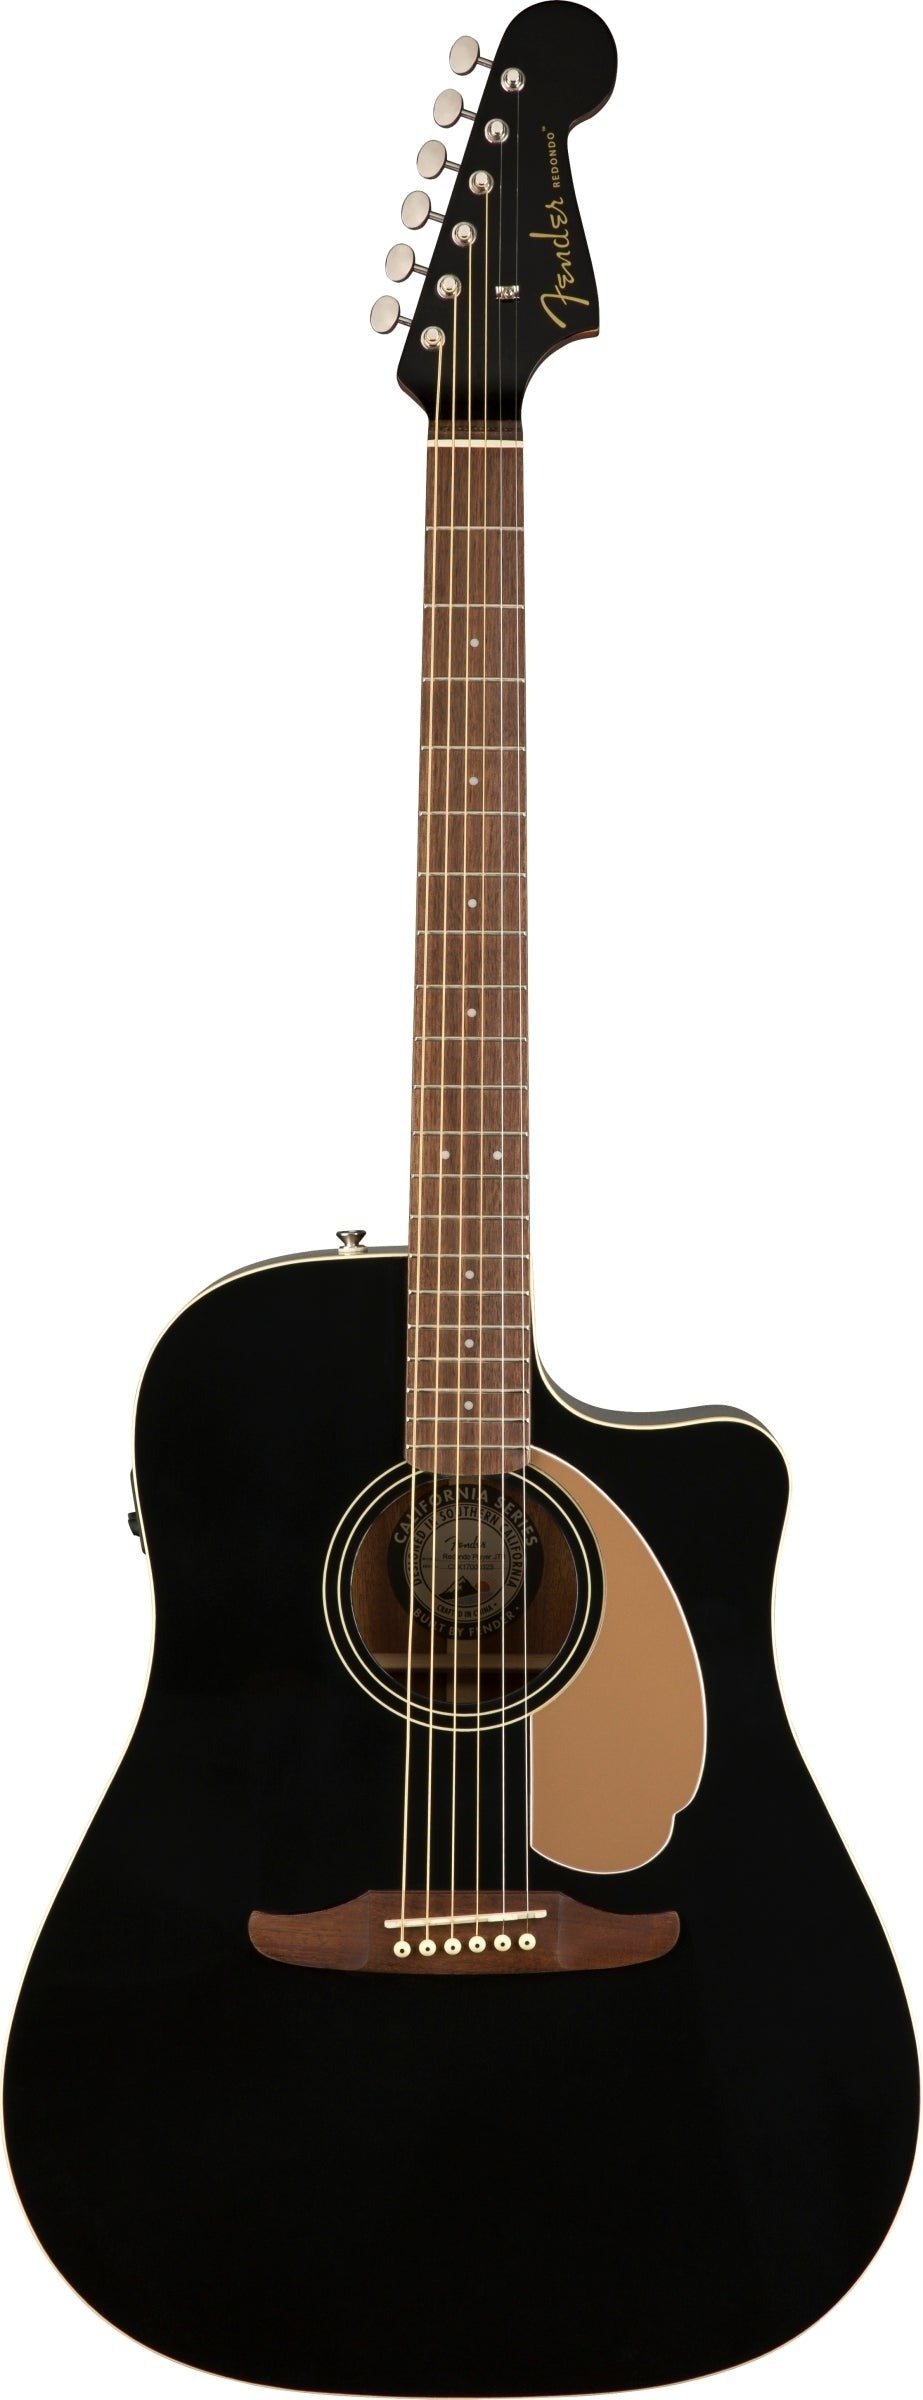 Fender Redondo Player 6 String Acoustic Electric Guitar - Jetty Black